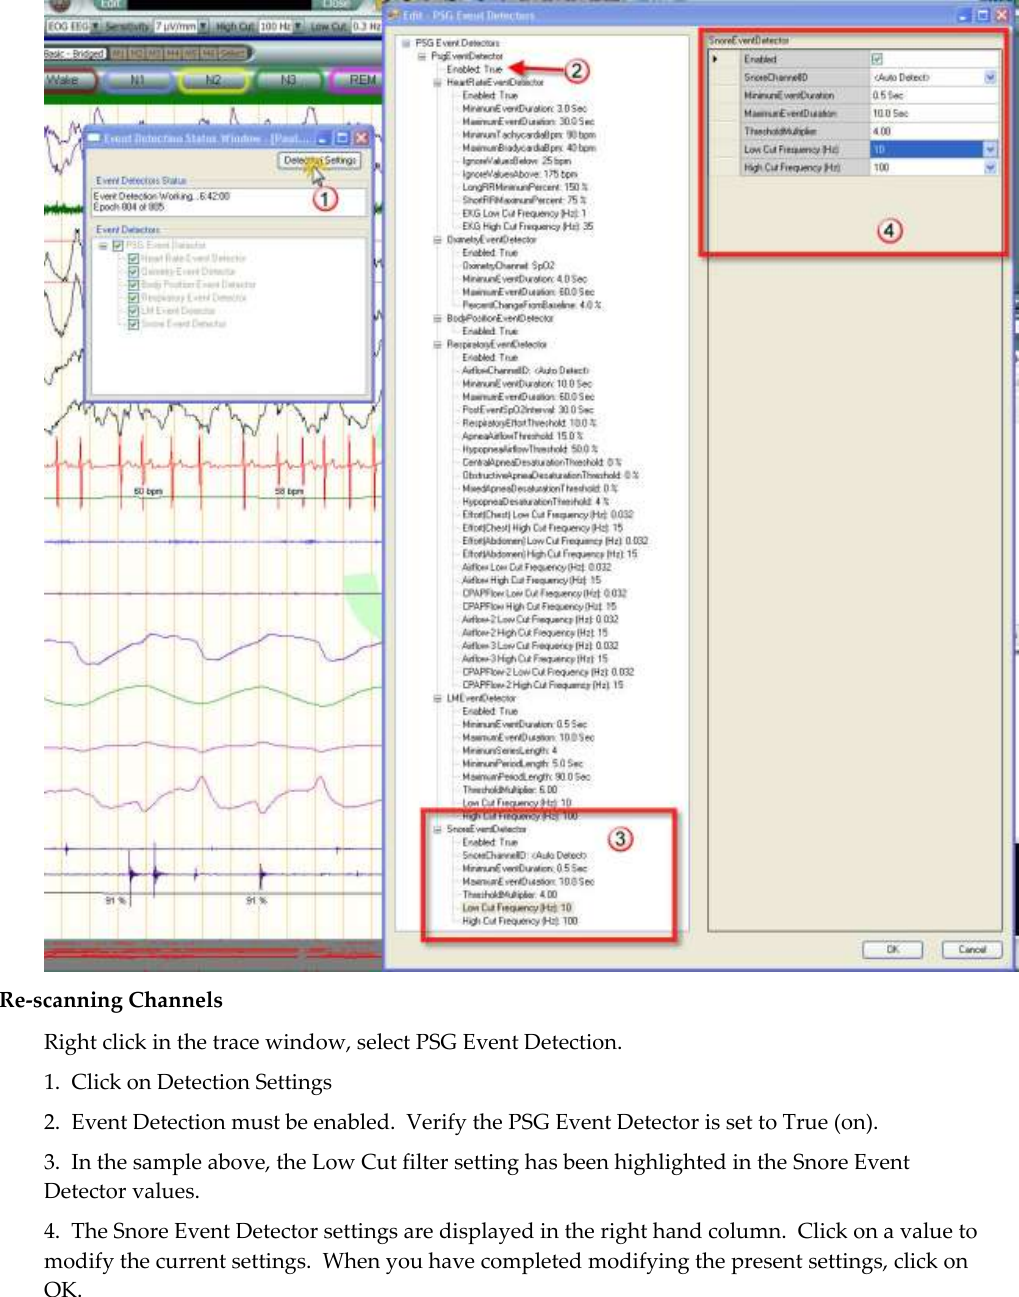   Re-scanning Channels Right click in the trace window, select PSG Event Detection. 1.  Click on Detection Settings 2.  Event Detection must be enabled.  Verify the PSG Event Detector is set to True (on). 3.  In the sample above, the Low Cut filter setting has been highlighted in the Snore Event Detector values. 4.  The Snore Event Detector settings are displayed in the right hand column.  Click on a value to modify the current settings.  When you have completed modifying the present settings, click on OK.  